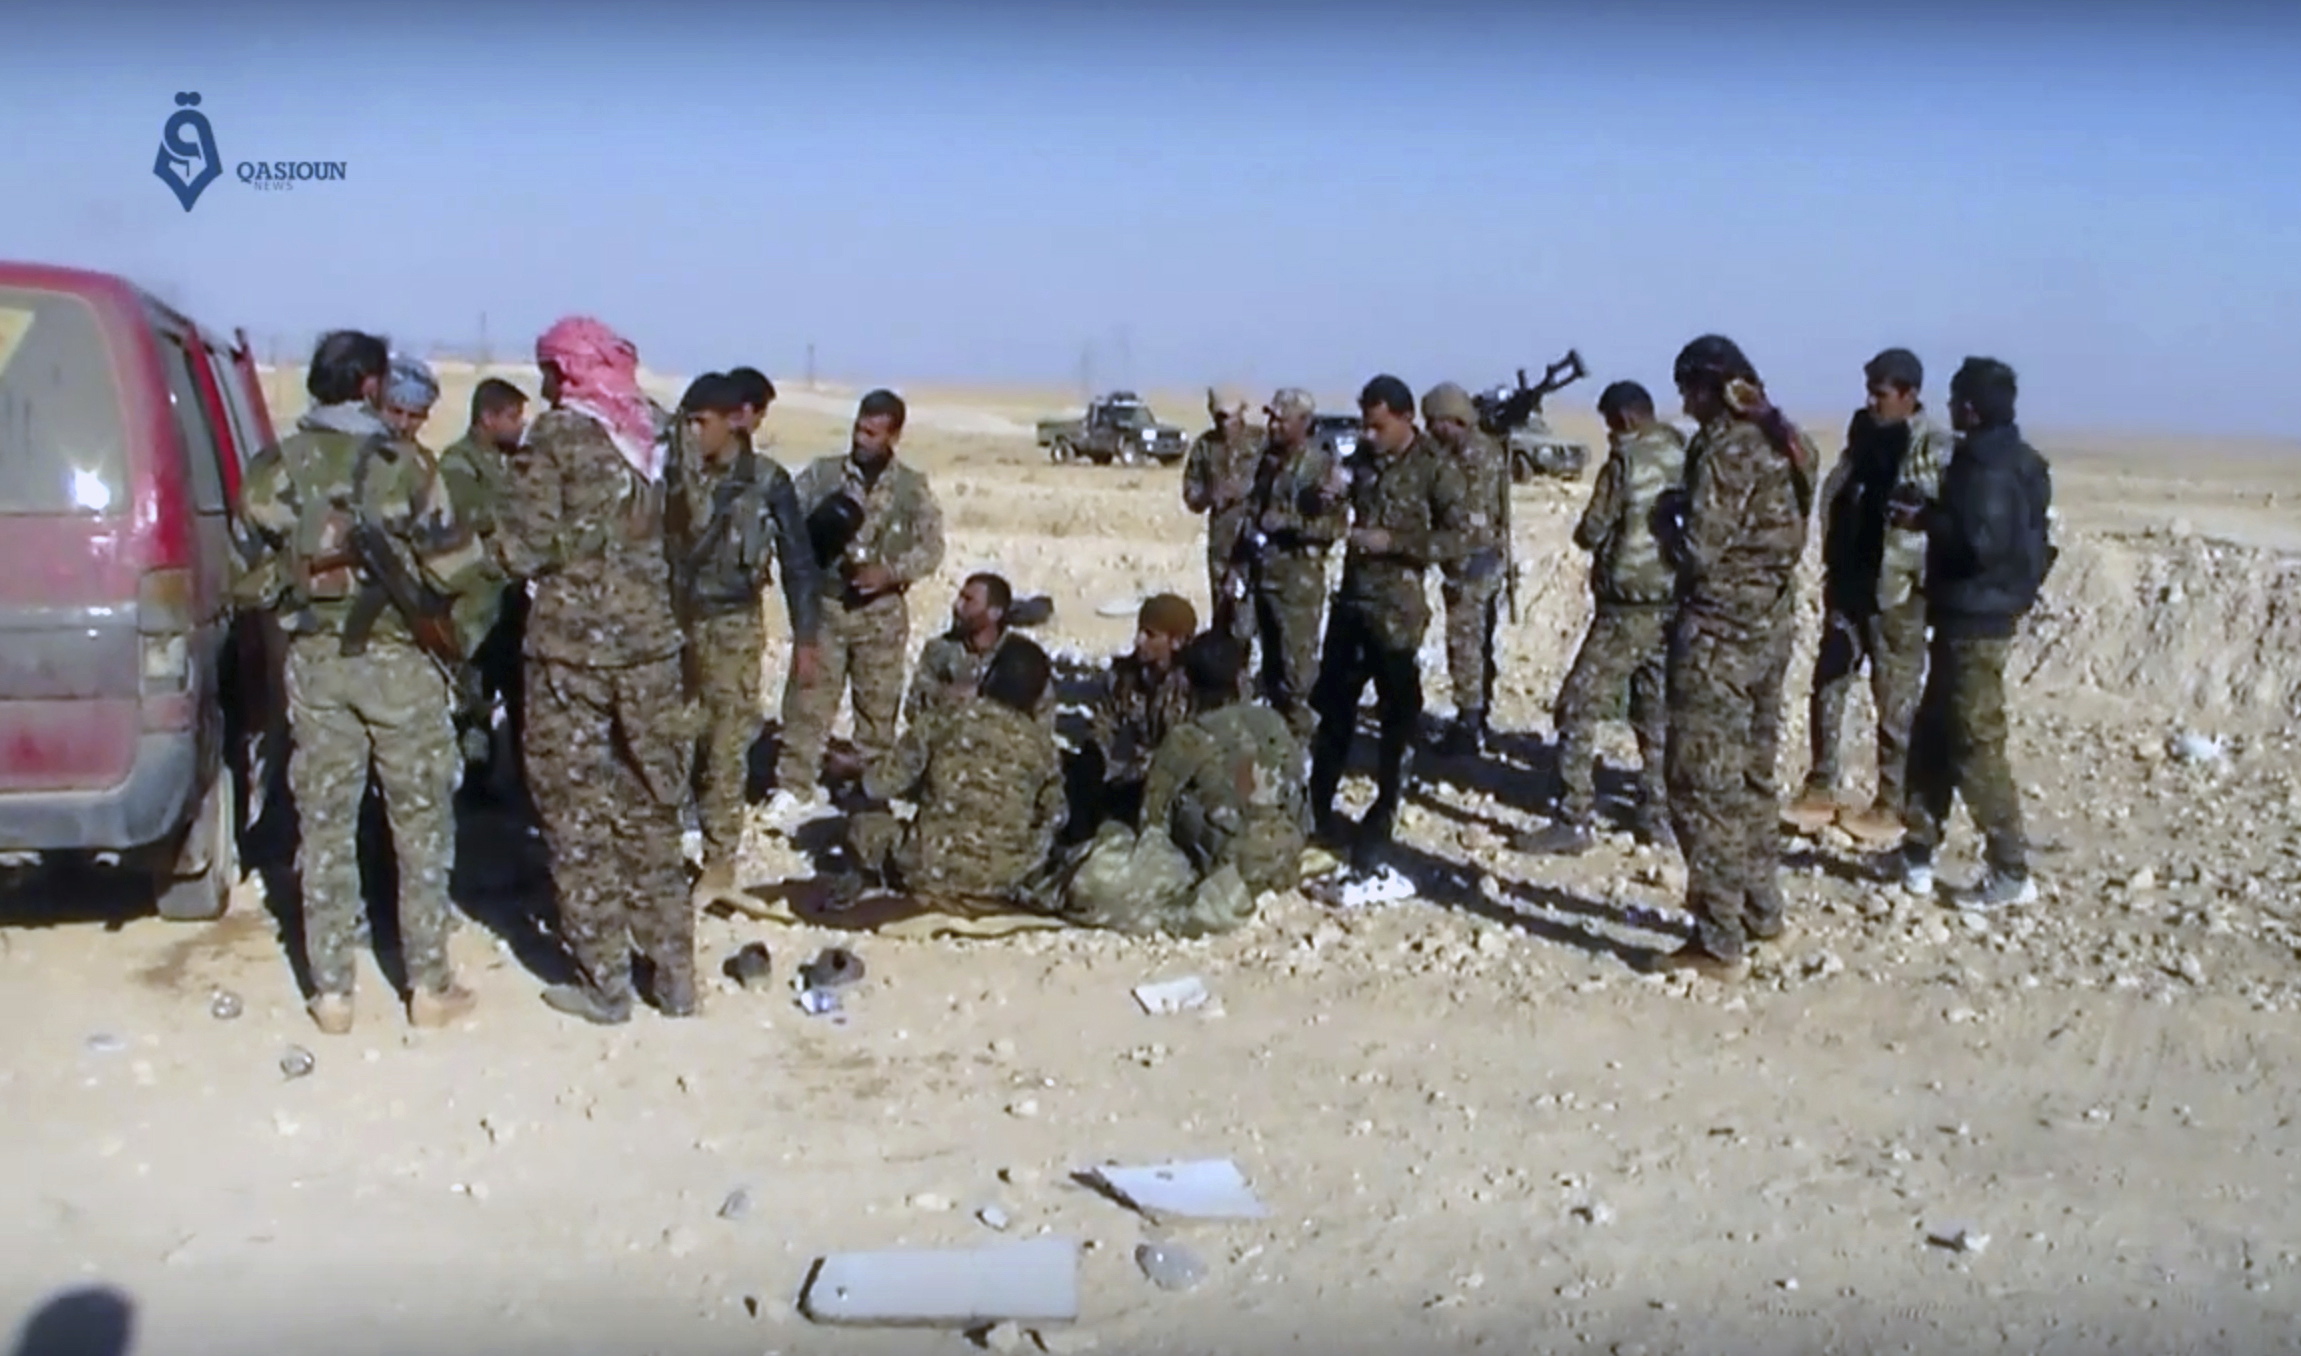 This frame grab from video provided by Qasioun a Syrian opposition media outlet, shows U.S.-backed fighters taking a rest during fighting with the Islamic State group near Ein Issa, north of Raqqa, Syria. Backed by U.S. airstrikes, Kurdish-led Syrian fighters clashed on Monday with Islamic State militants north of the city of Raqqa in Syria as they pushed ahead in their offensive aiming to liberate the city that has been the de facto capital of the extremist group since 2014. (Qasioun a Syrian Opposition Media Outlet, via AP)